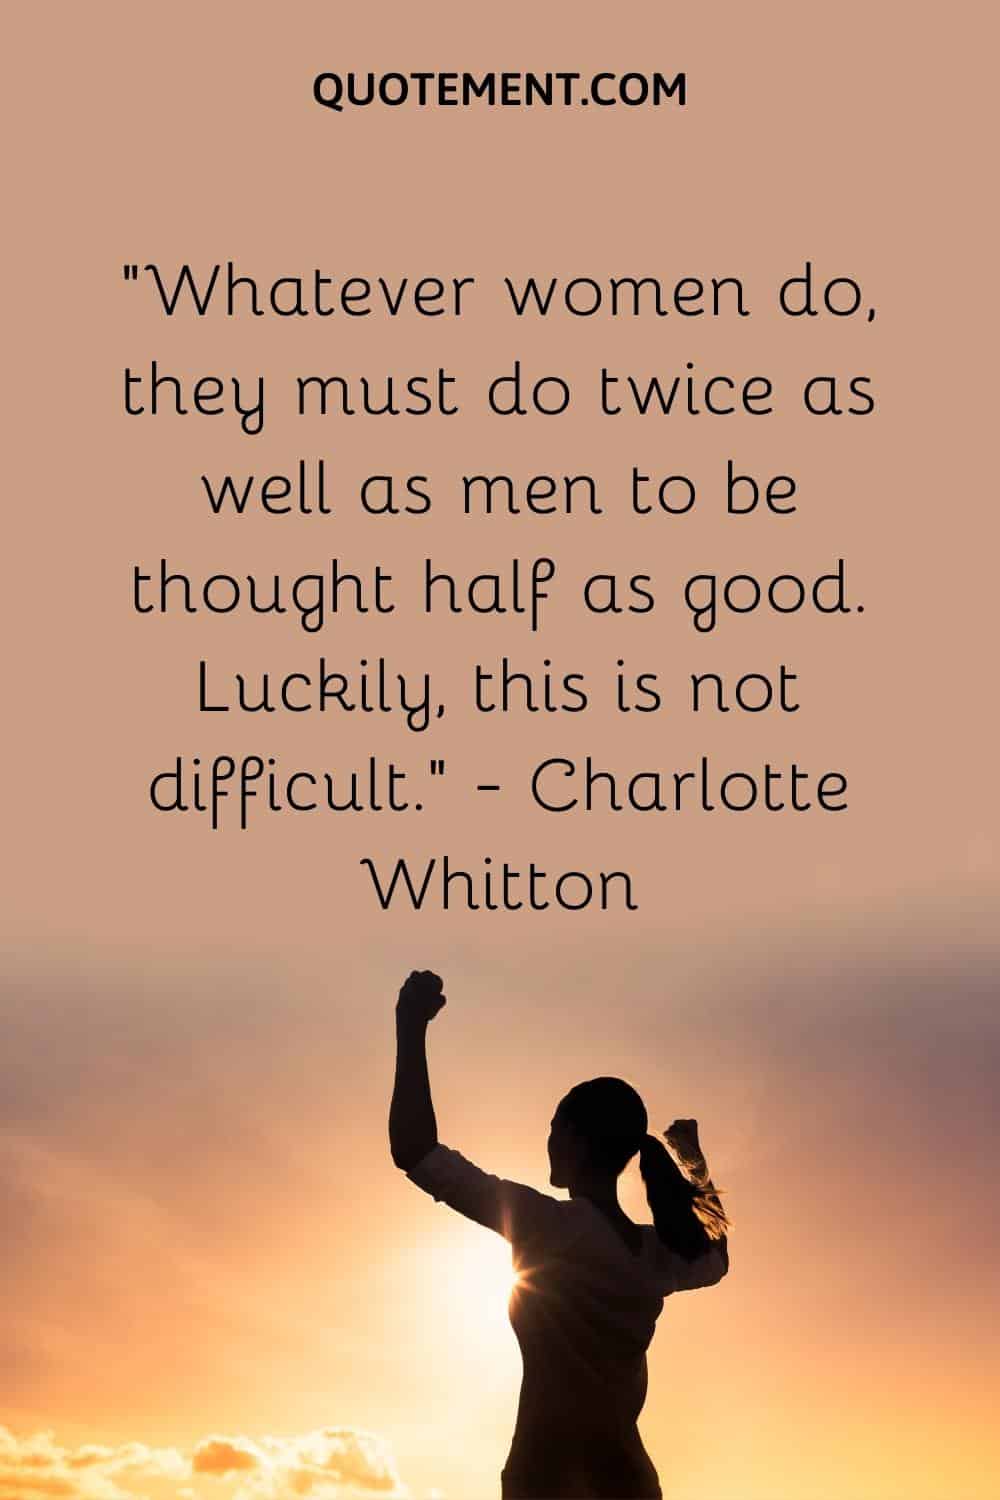 Whatever women do, they must do twice as well as men to be thought half as good